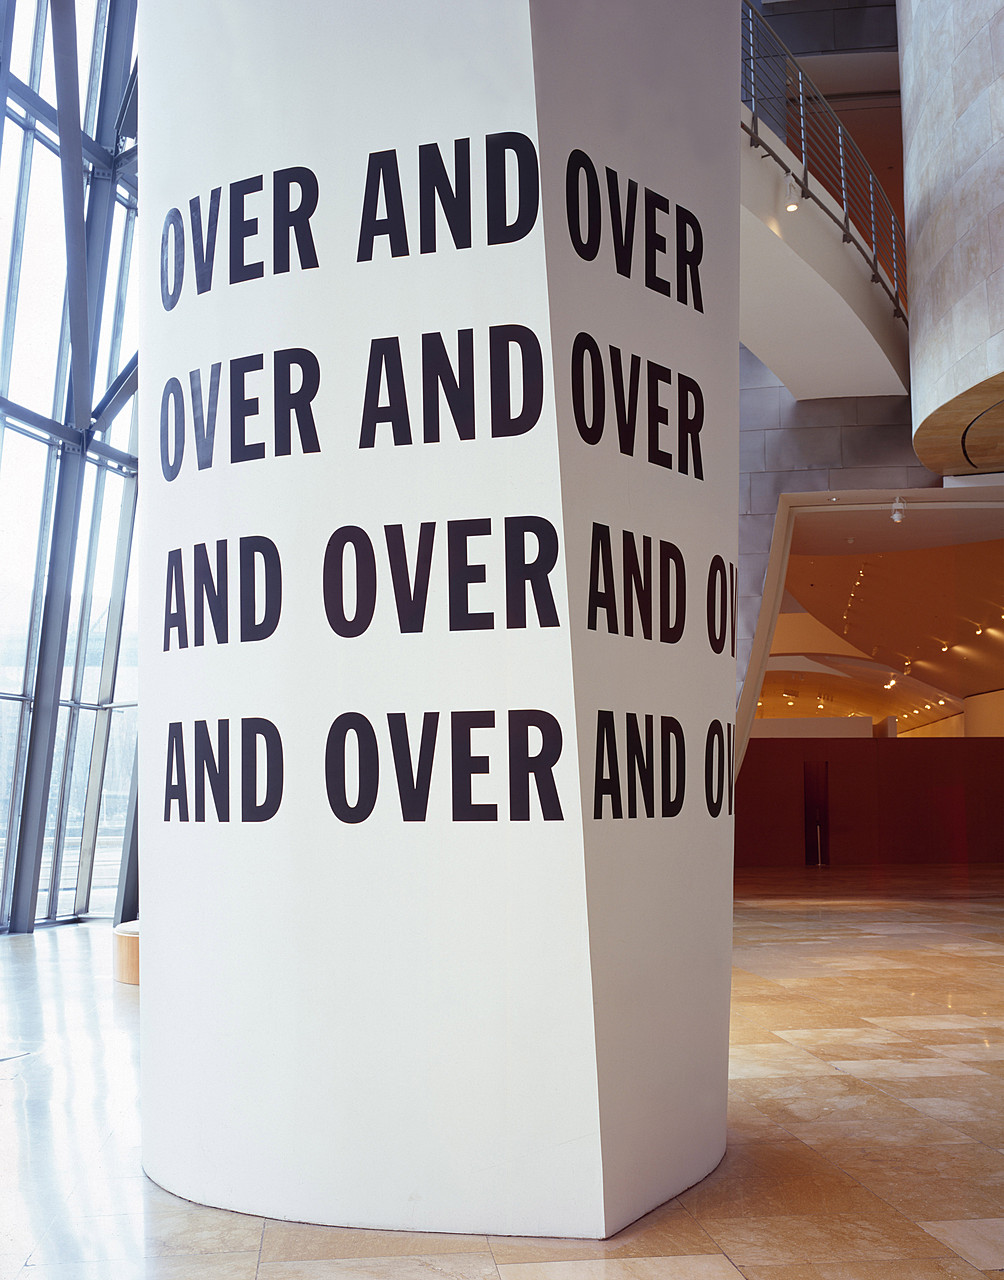 Lawrence Weiner   OVER AND OVER. OVER AND OVER. AND OVER AND OVER